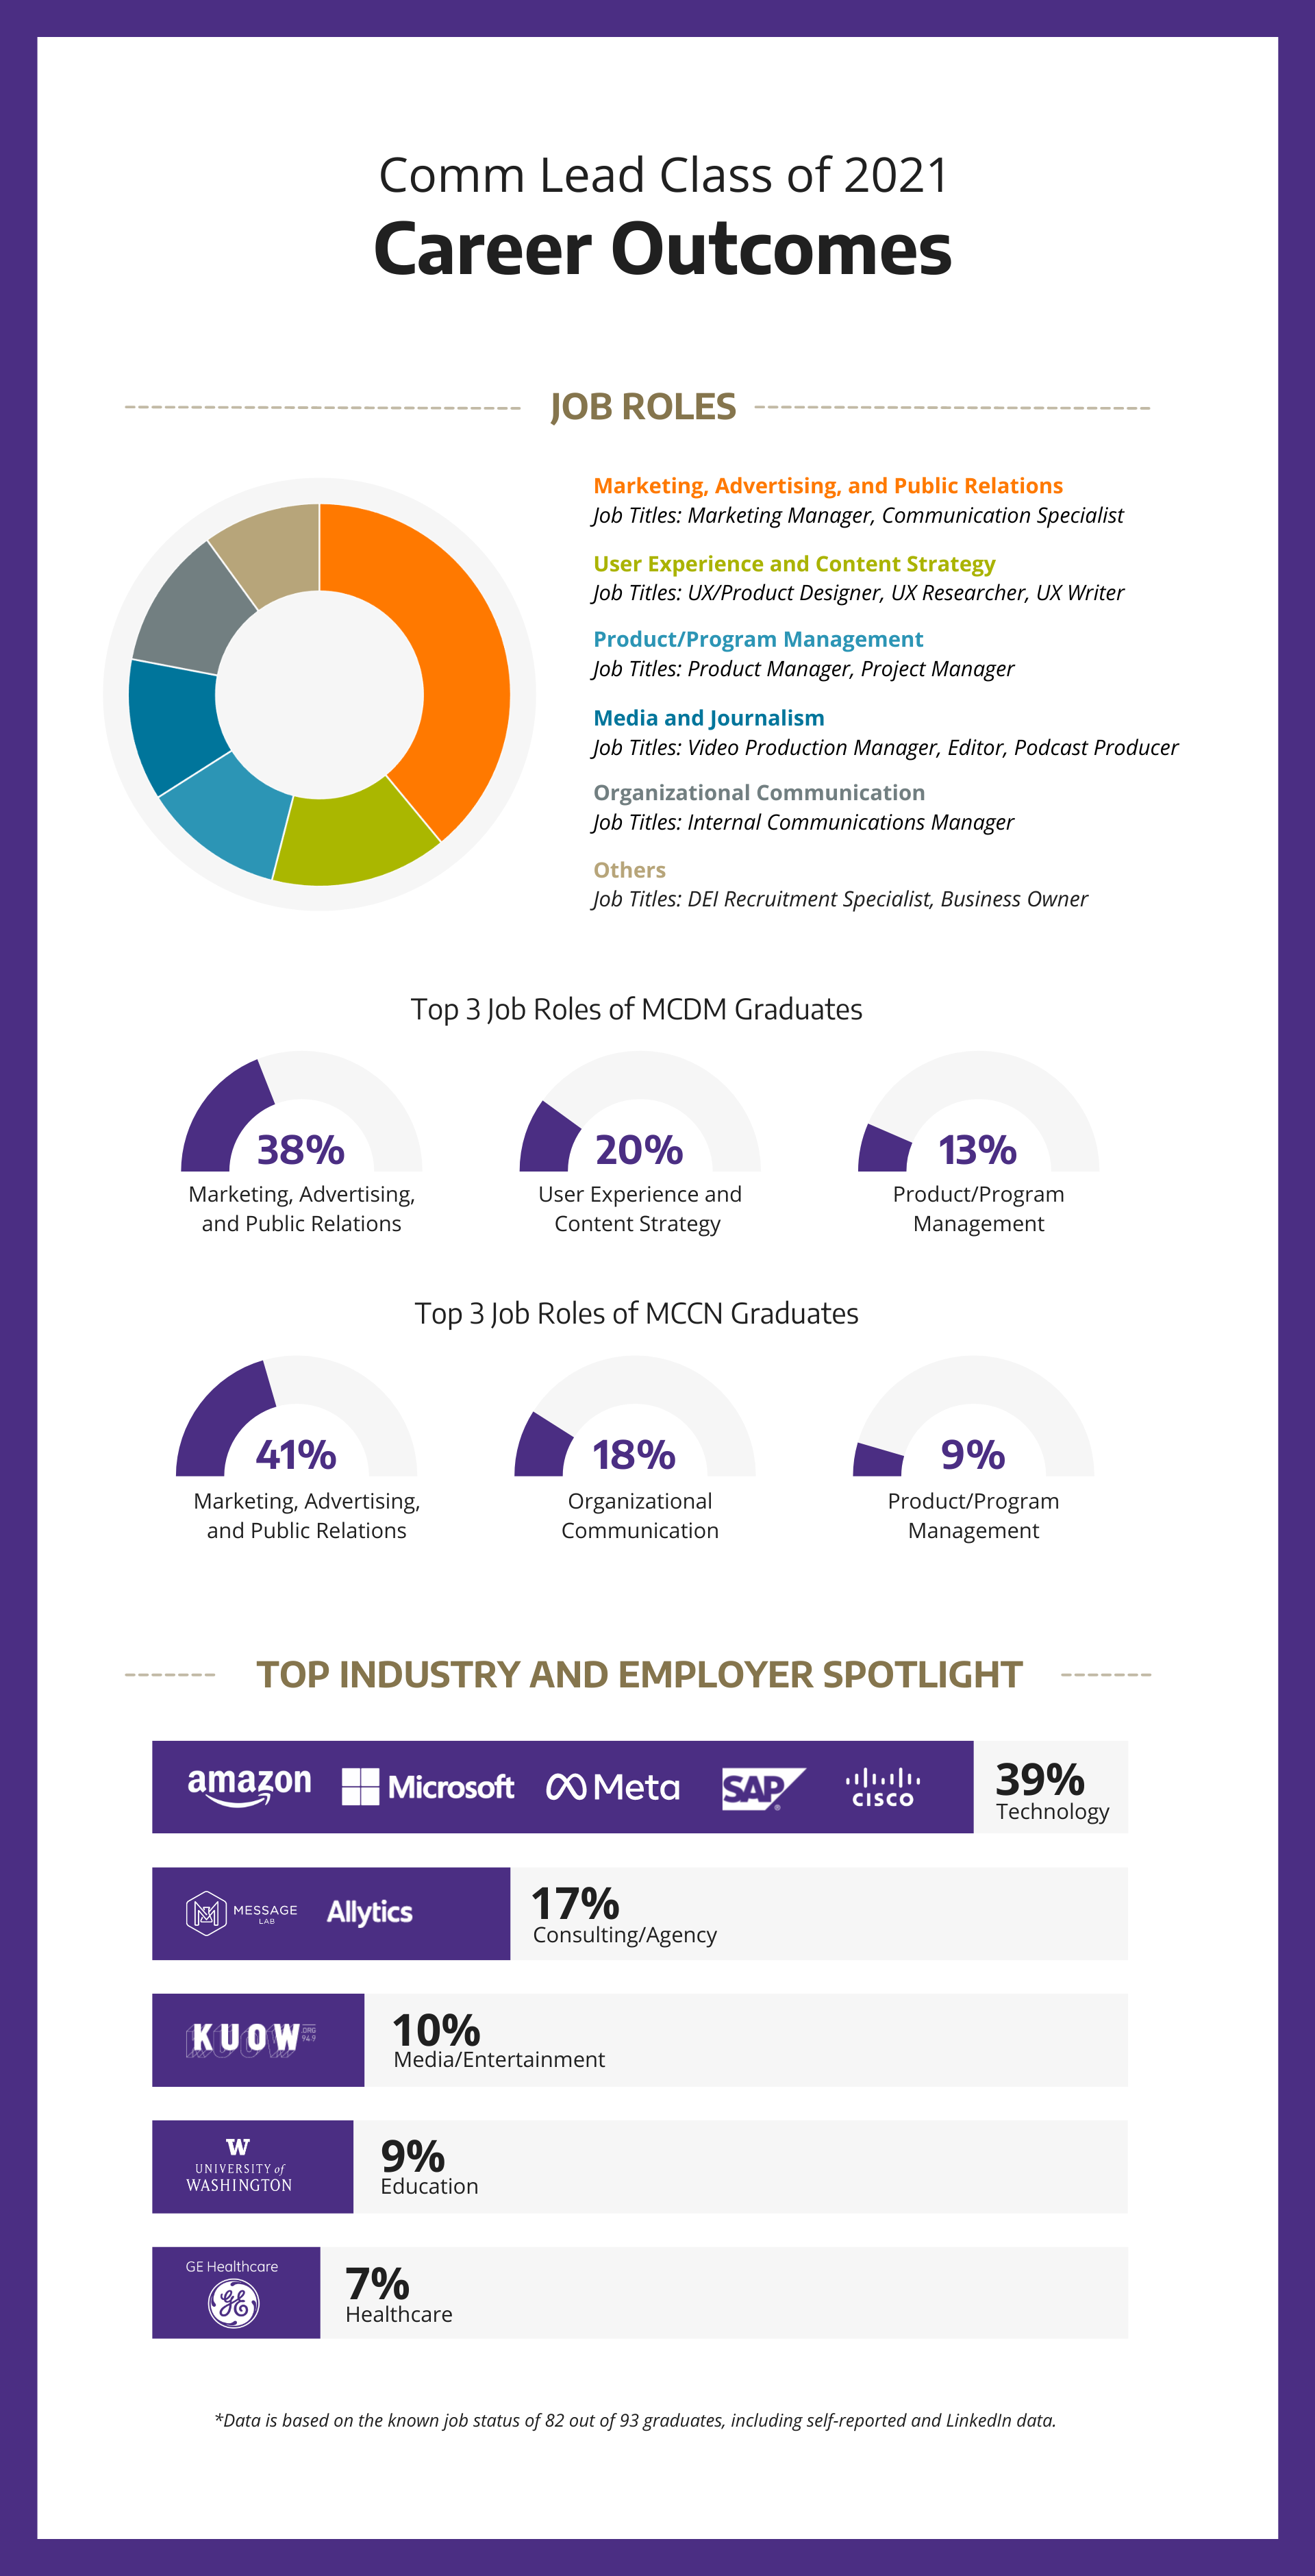 Infographic of Class of 2021Career Outcomes. 39 percent work in tech, 17 percent work at agencies, 10 percent work in Media or Entertainment, 9 percent work in education, 7 percent work in healthcare.